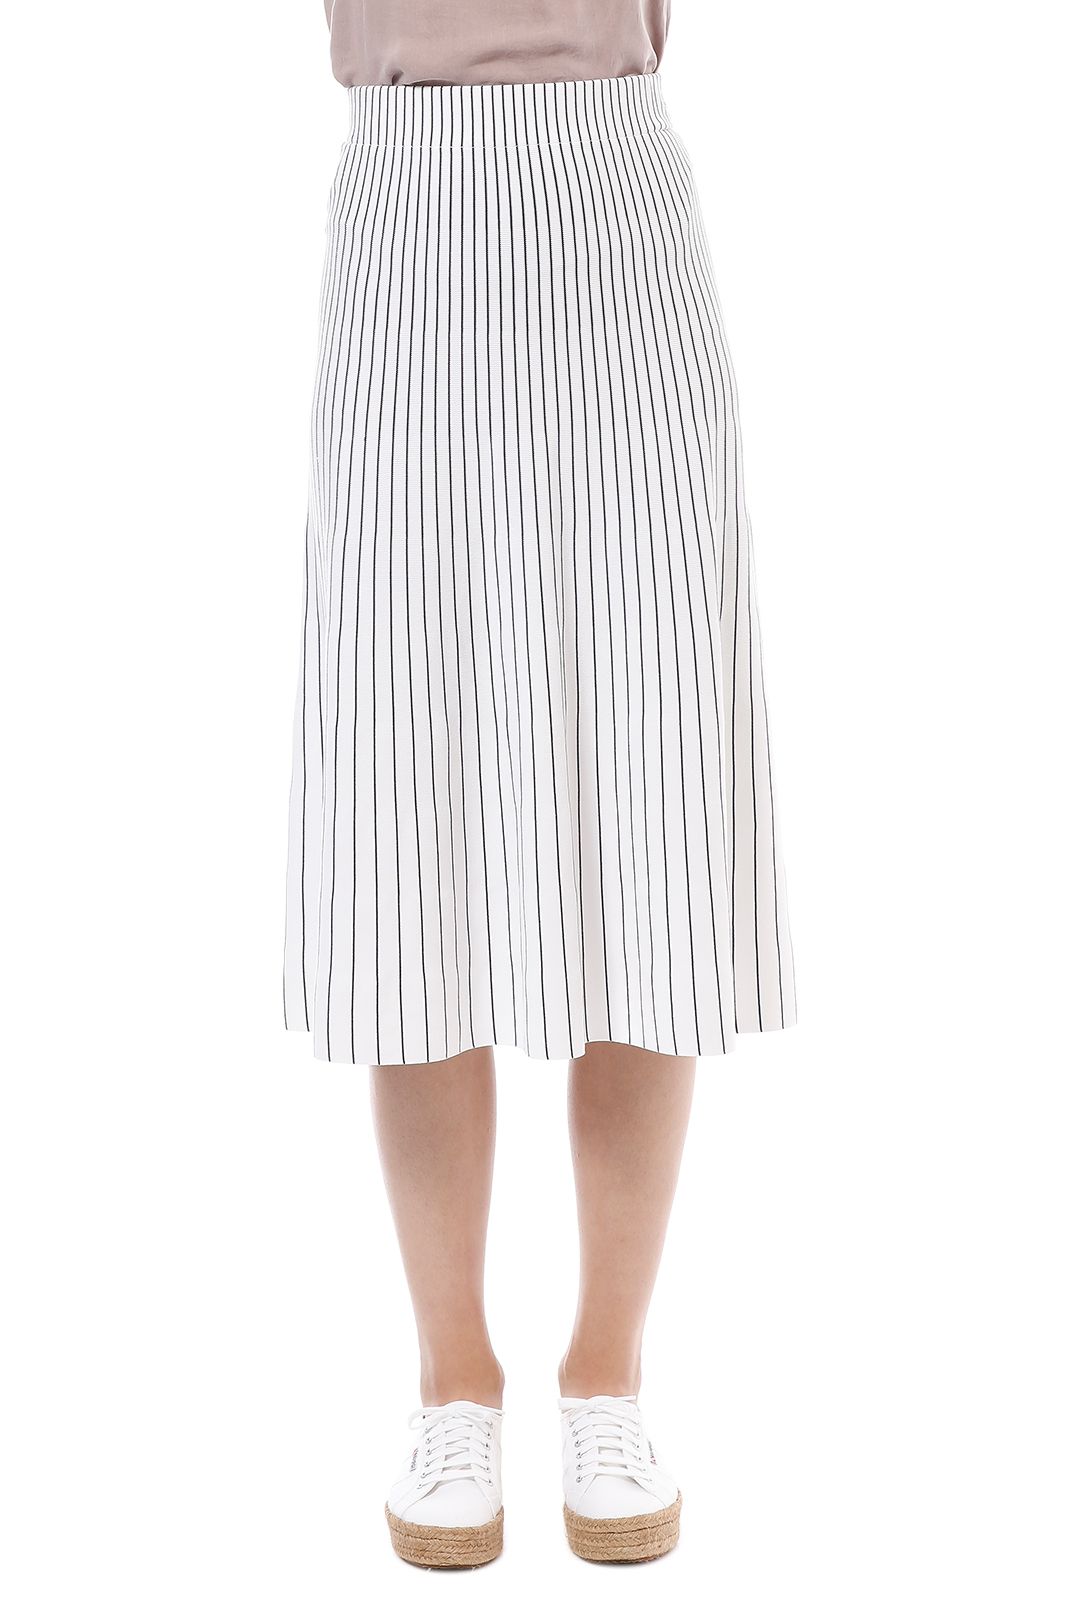 Elka Collective - Ruby Skirt - White Stripe - Front Detail